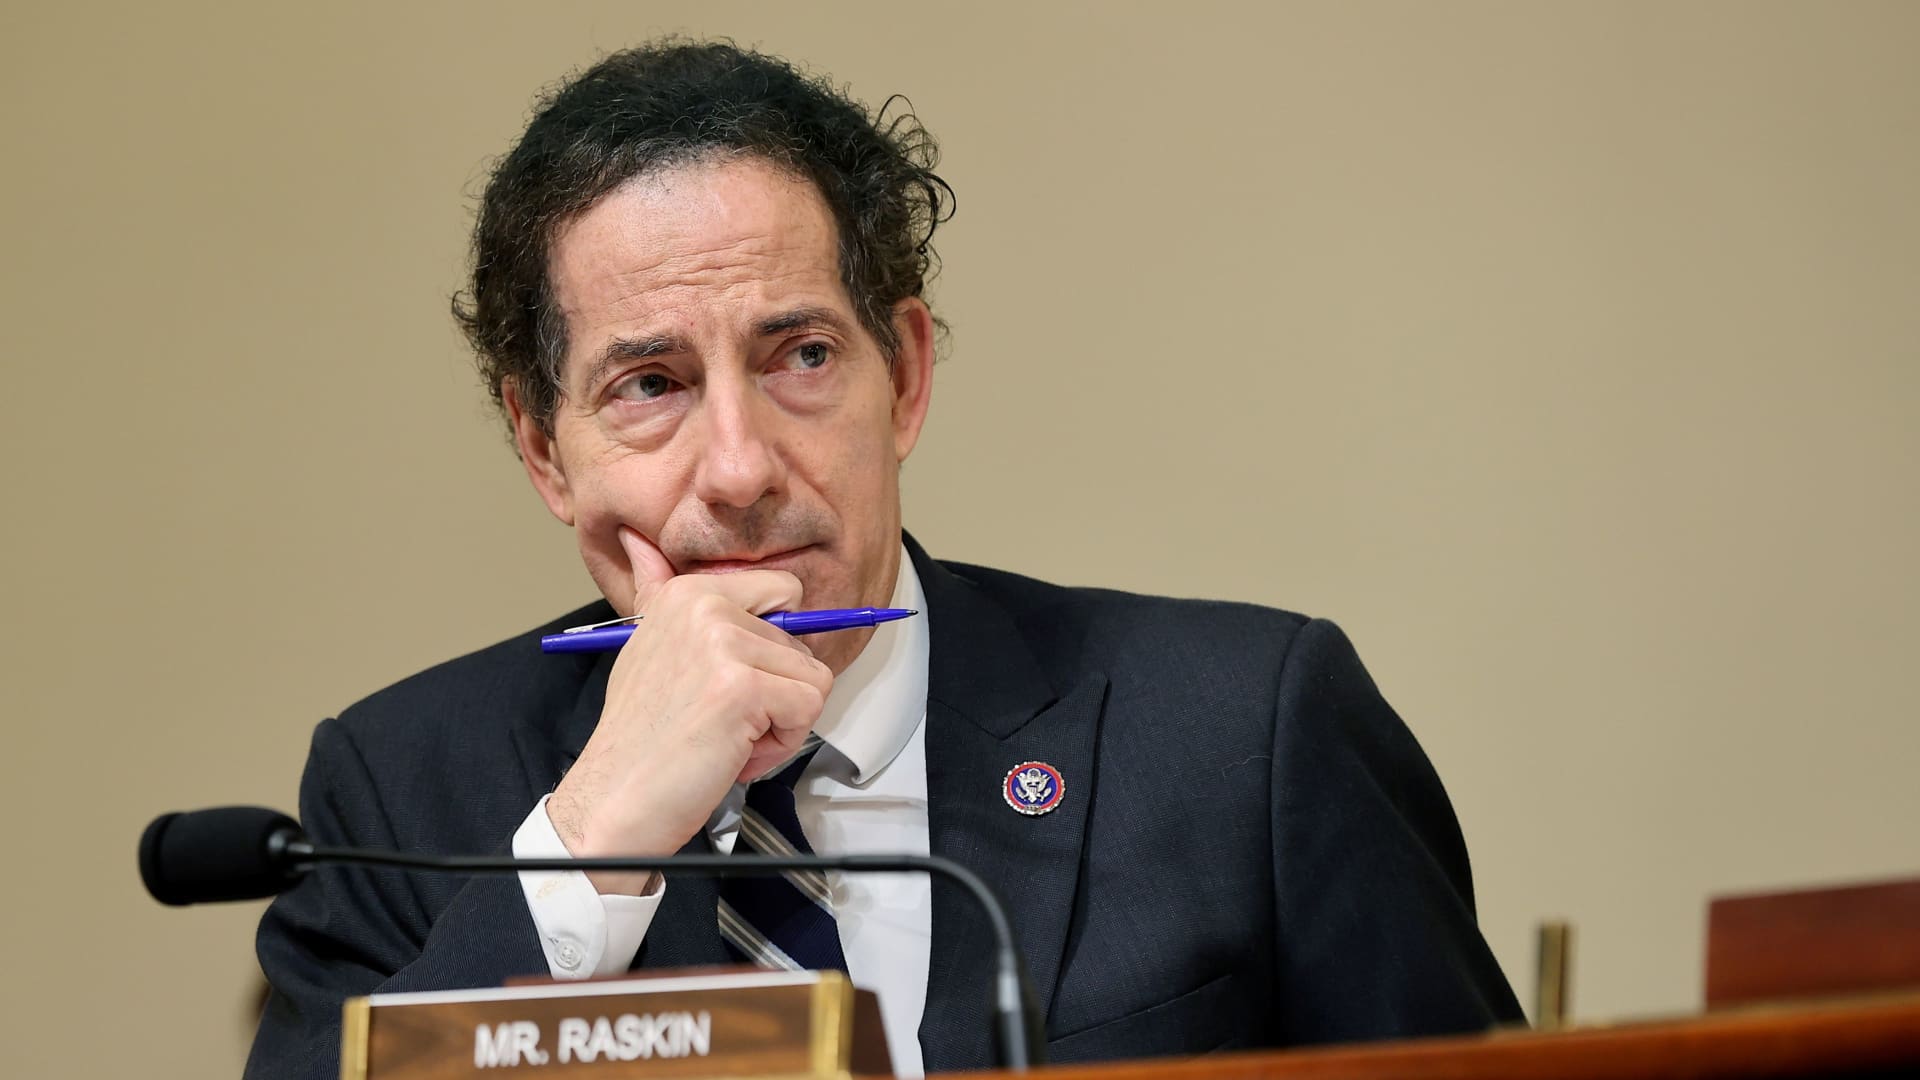 U.S. Rep. Jamie Raskin (D-MD) listens to testimony during a hearing by the House Select Committee investigating the Jan. 6 attack on Capitol Hill in Washington, U.S., July 27, 2021.